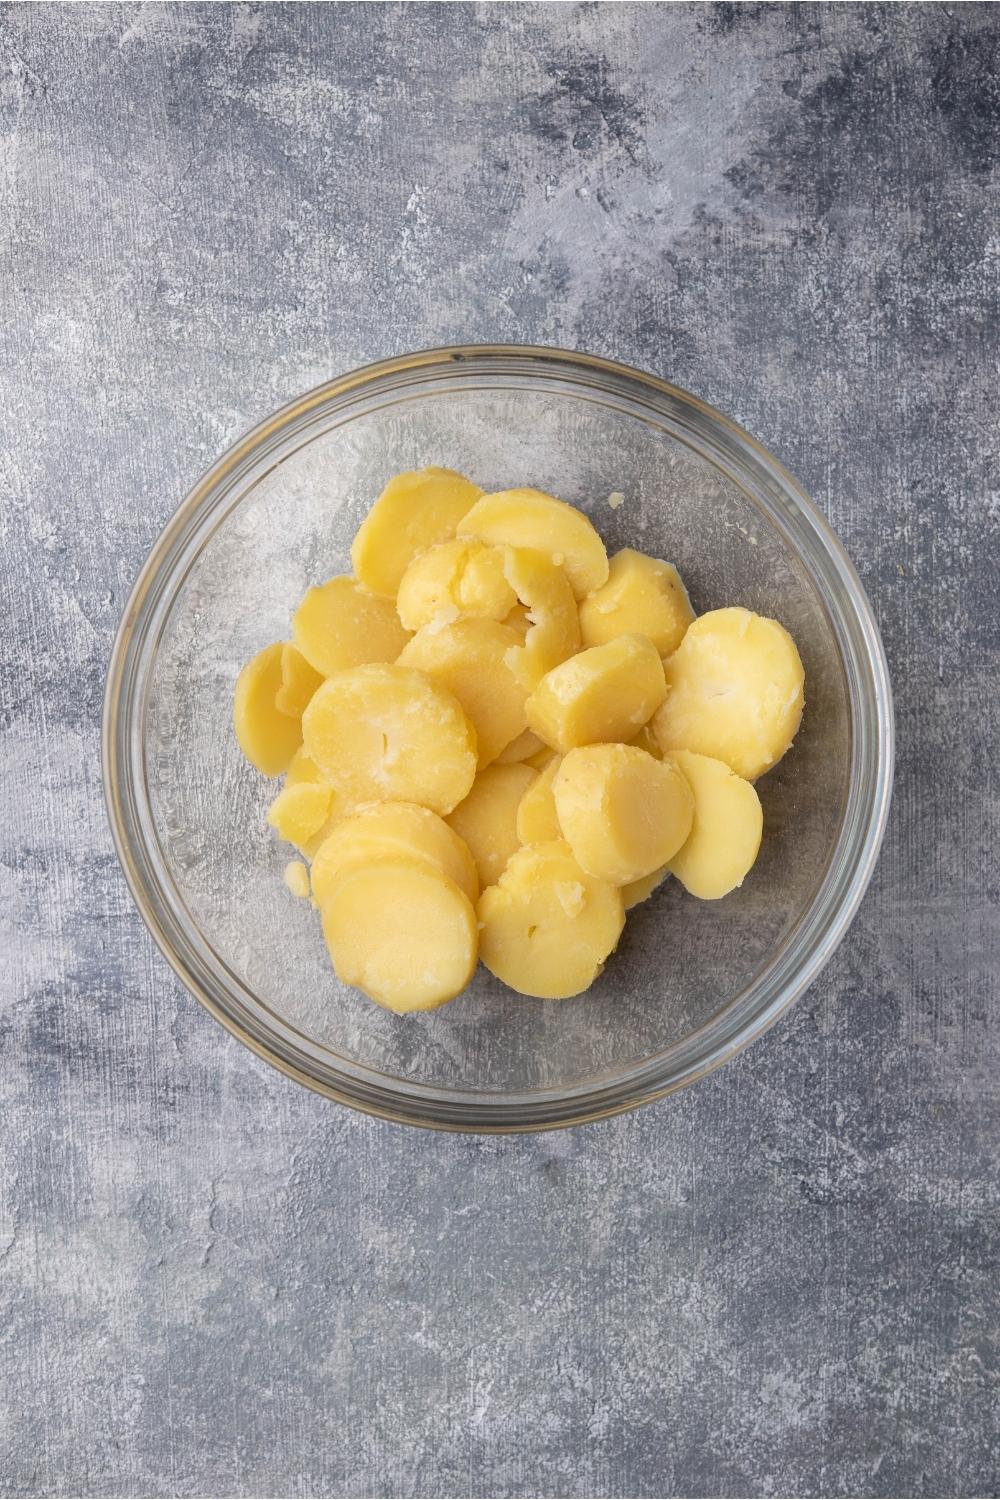 Clear bowl with cooked and peeled Russet potatoes cut into thick slices.